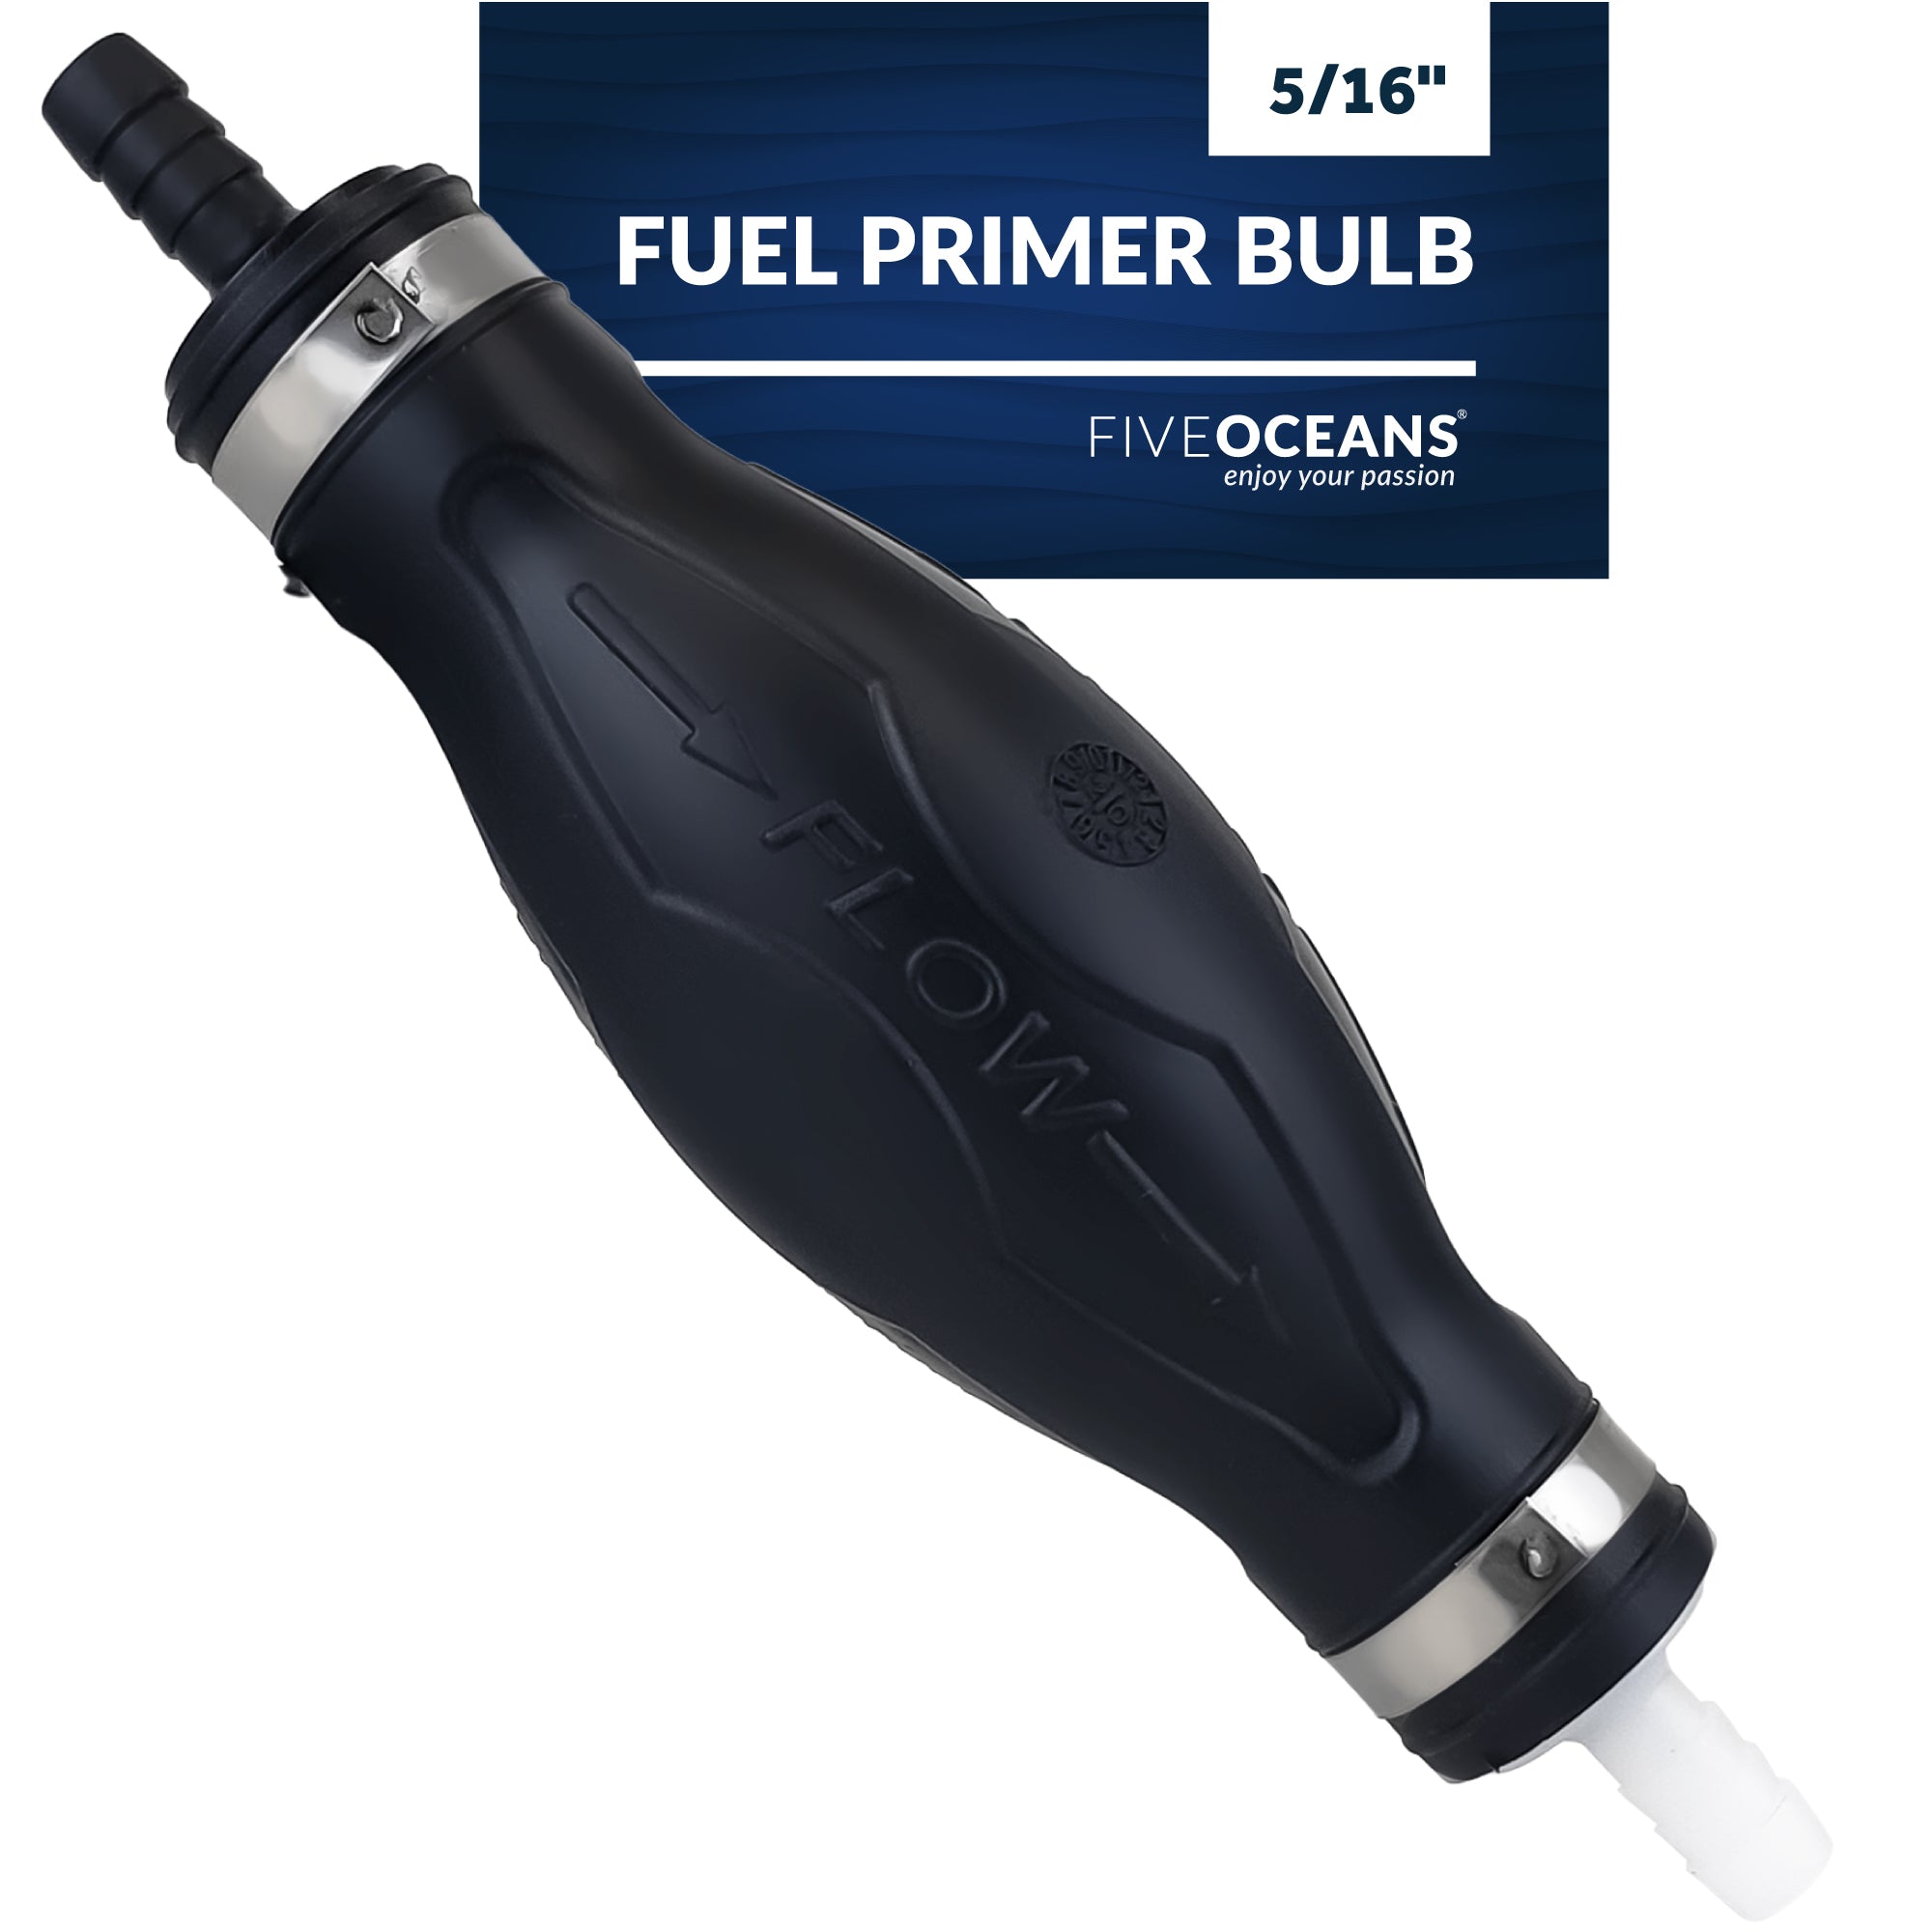 Fuel Primer Bulb, 5/16", Large EPA/CARB Approved, - FO4516